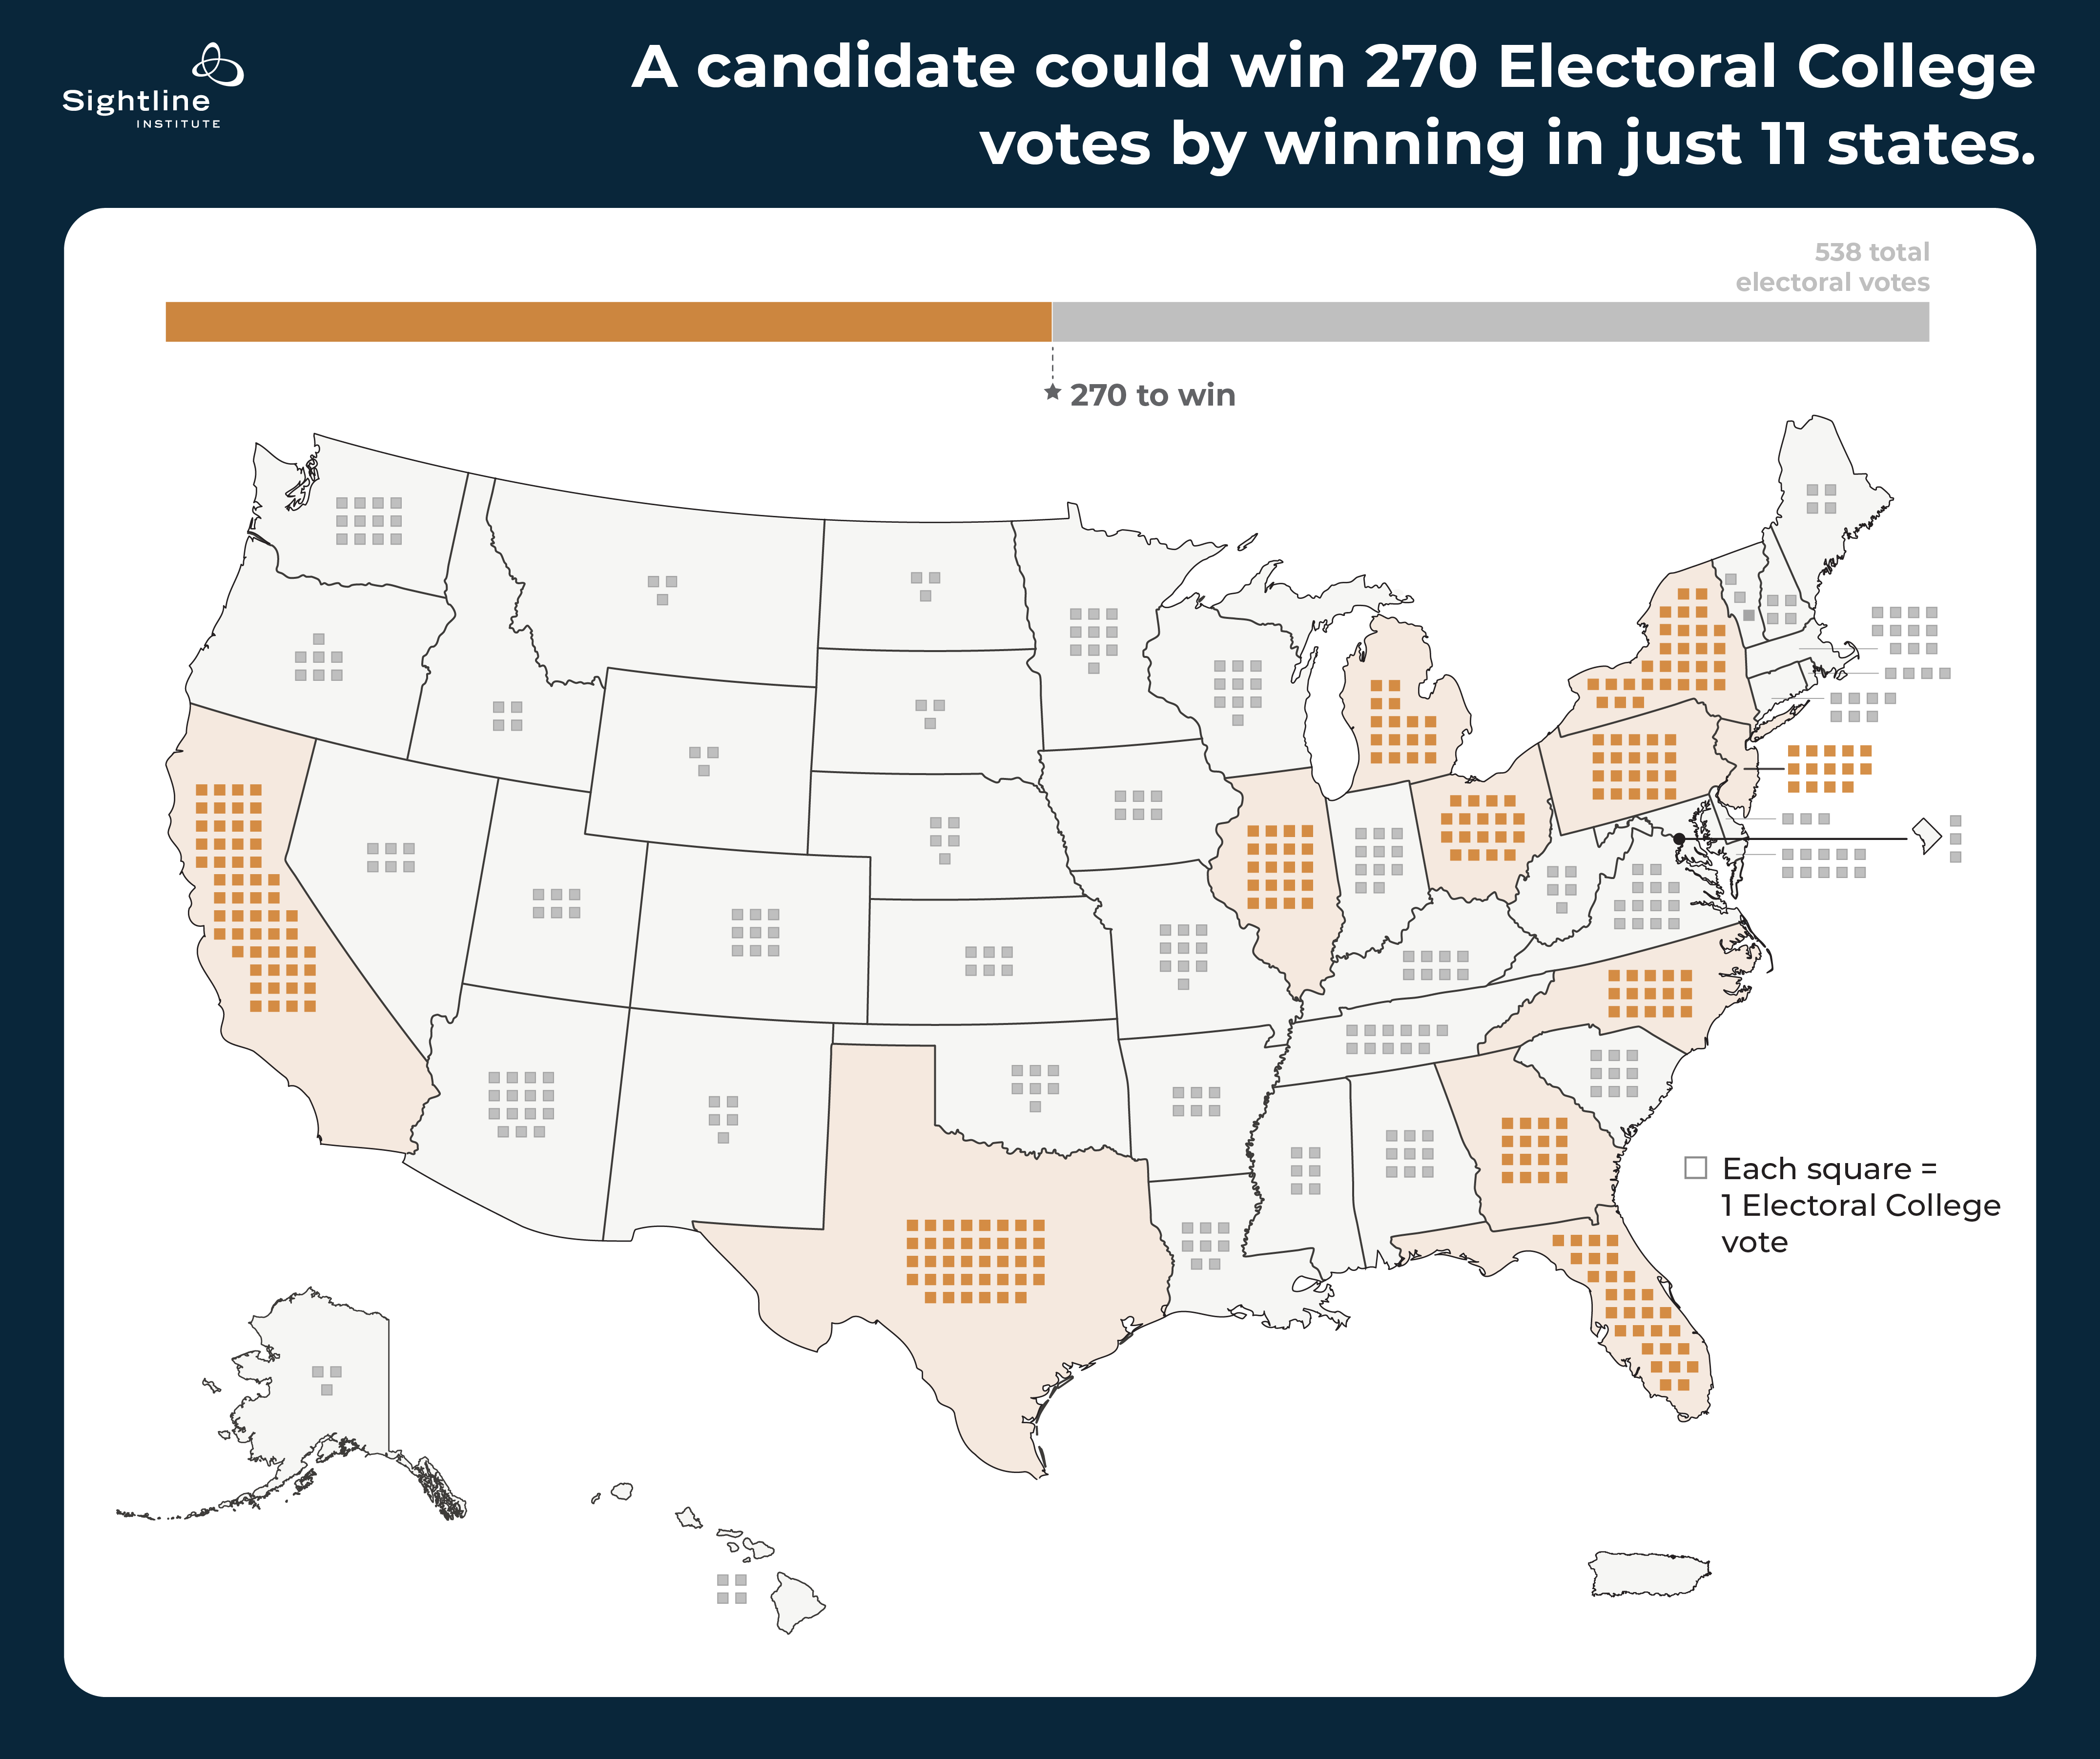 A Candidate Could Win 270 Electoral College Votes By Winning in Just 11 States. Map of the United States.